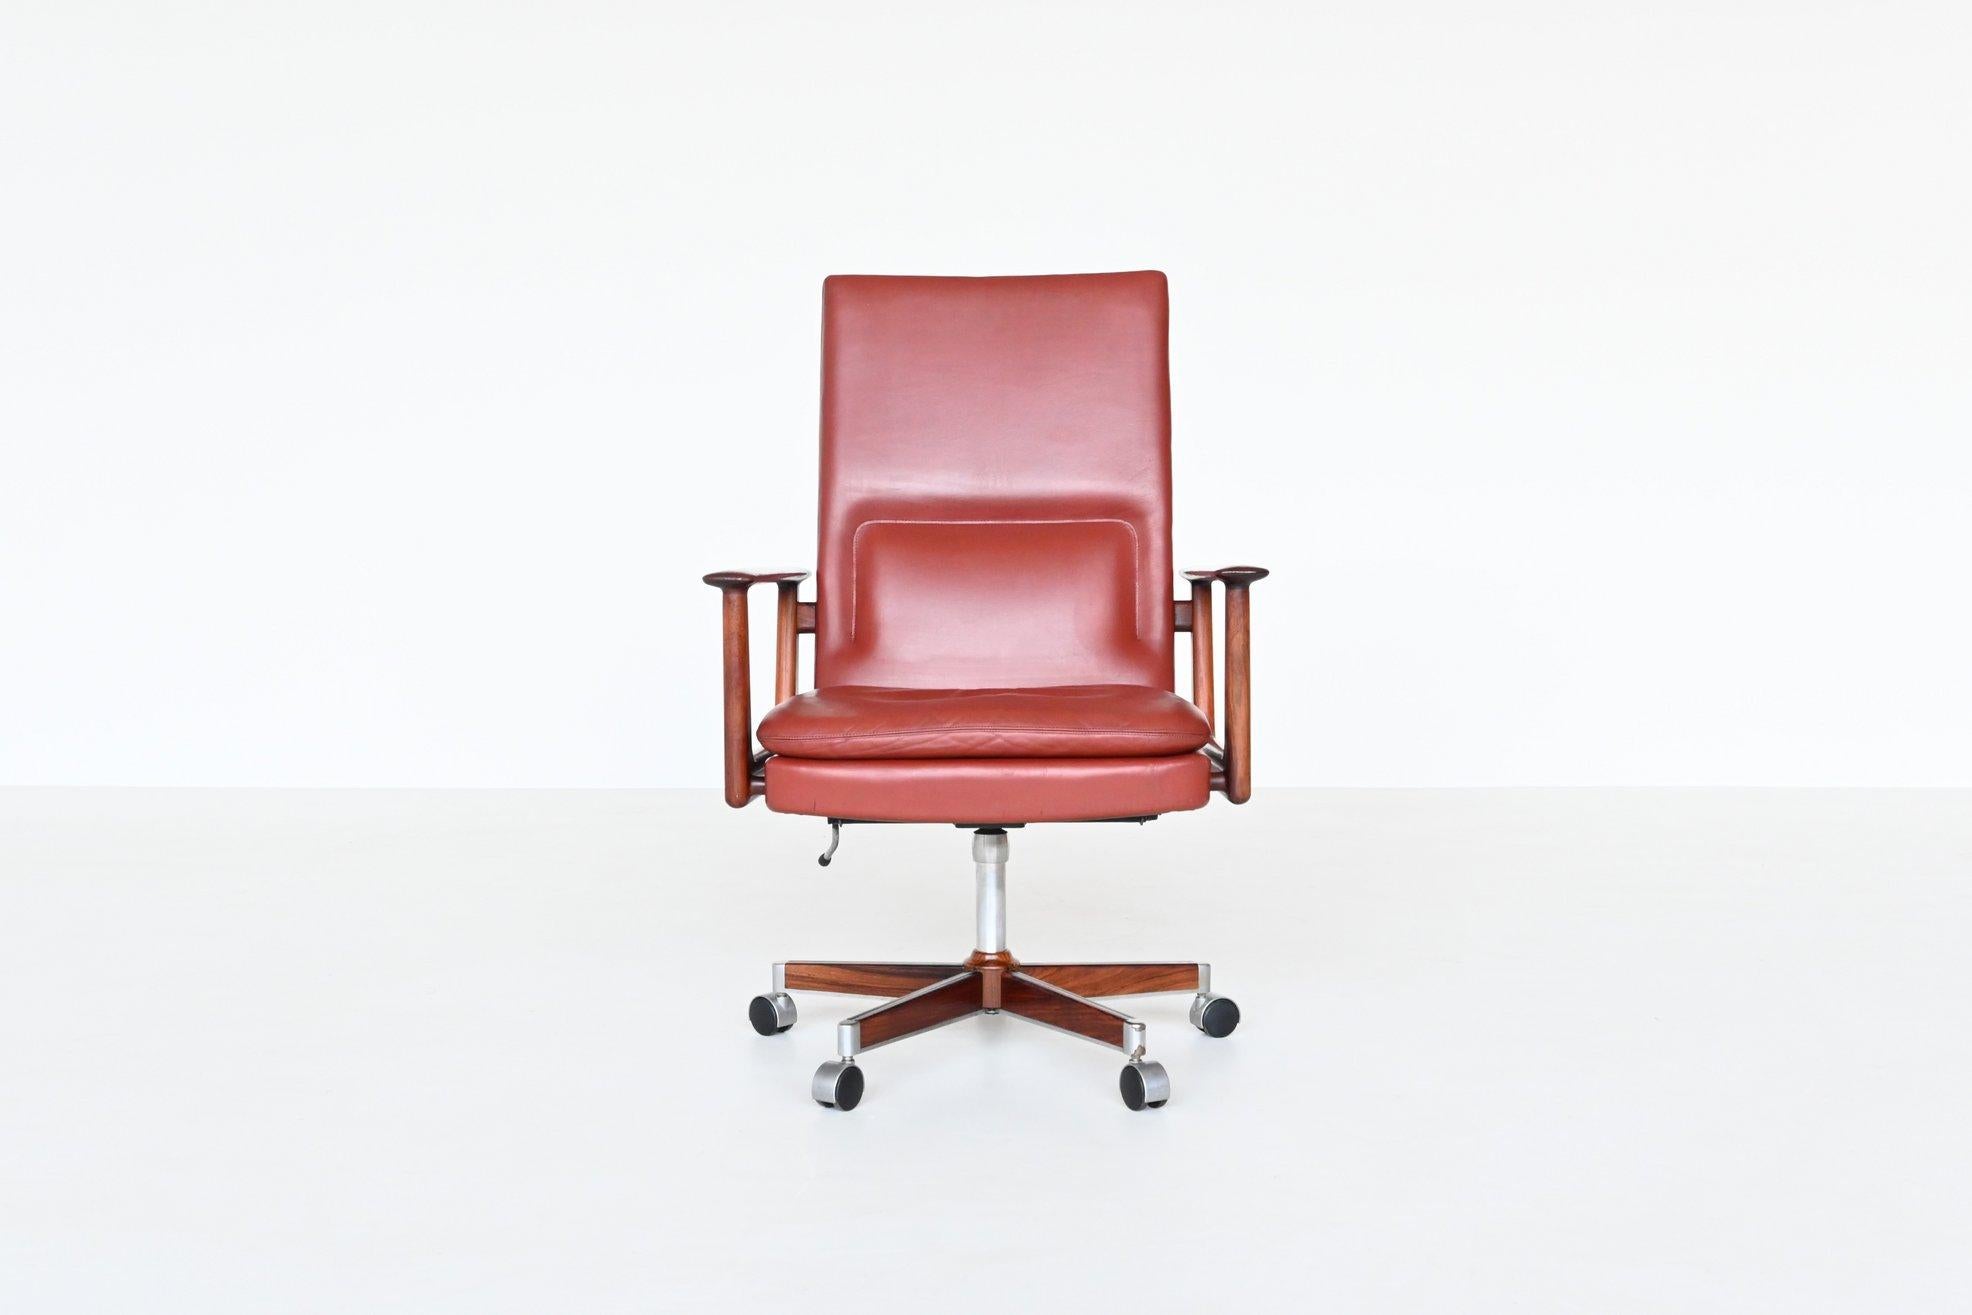 Beautiful president desk chair model 419 designed by Arne Vodder for Sibast Furniture, Denmark 1960. This Danish design exclusive chair has sculptural rosewood armrests. The aluminium base with rosewood inlay and the cognac leather seating makes it